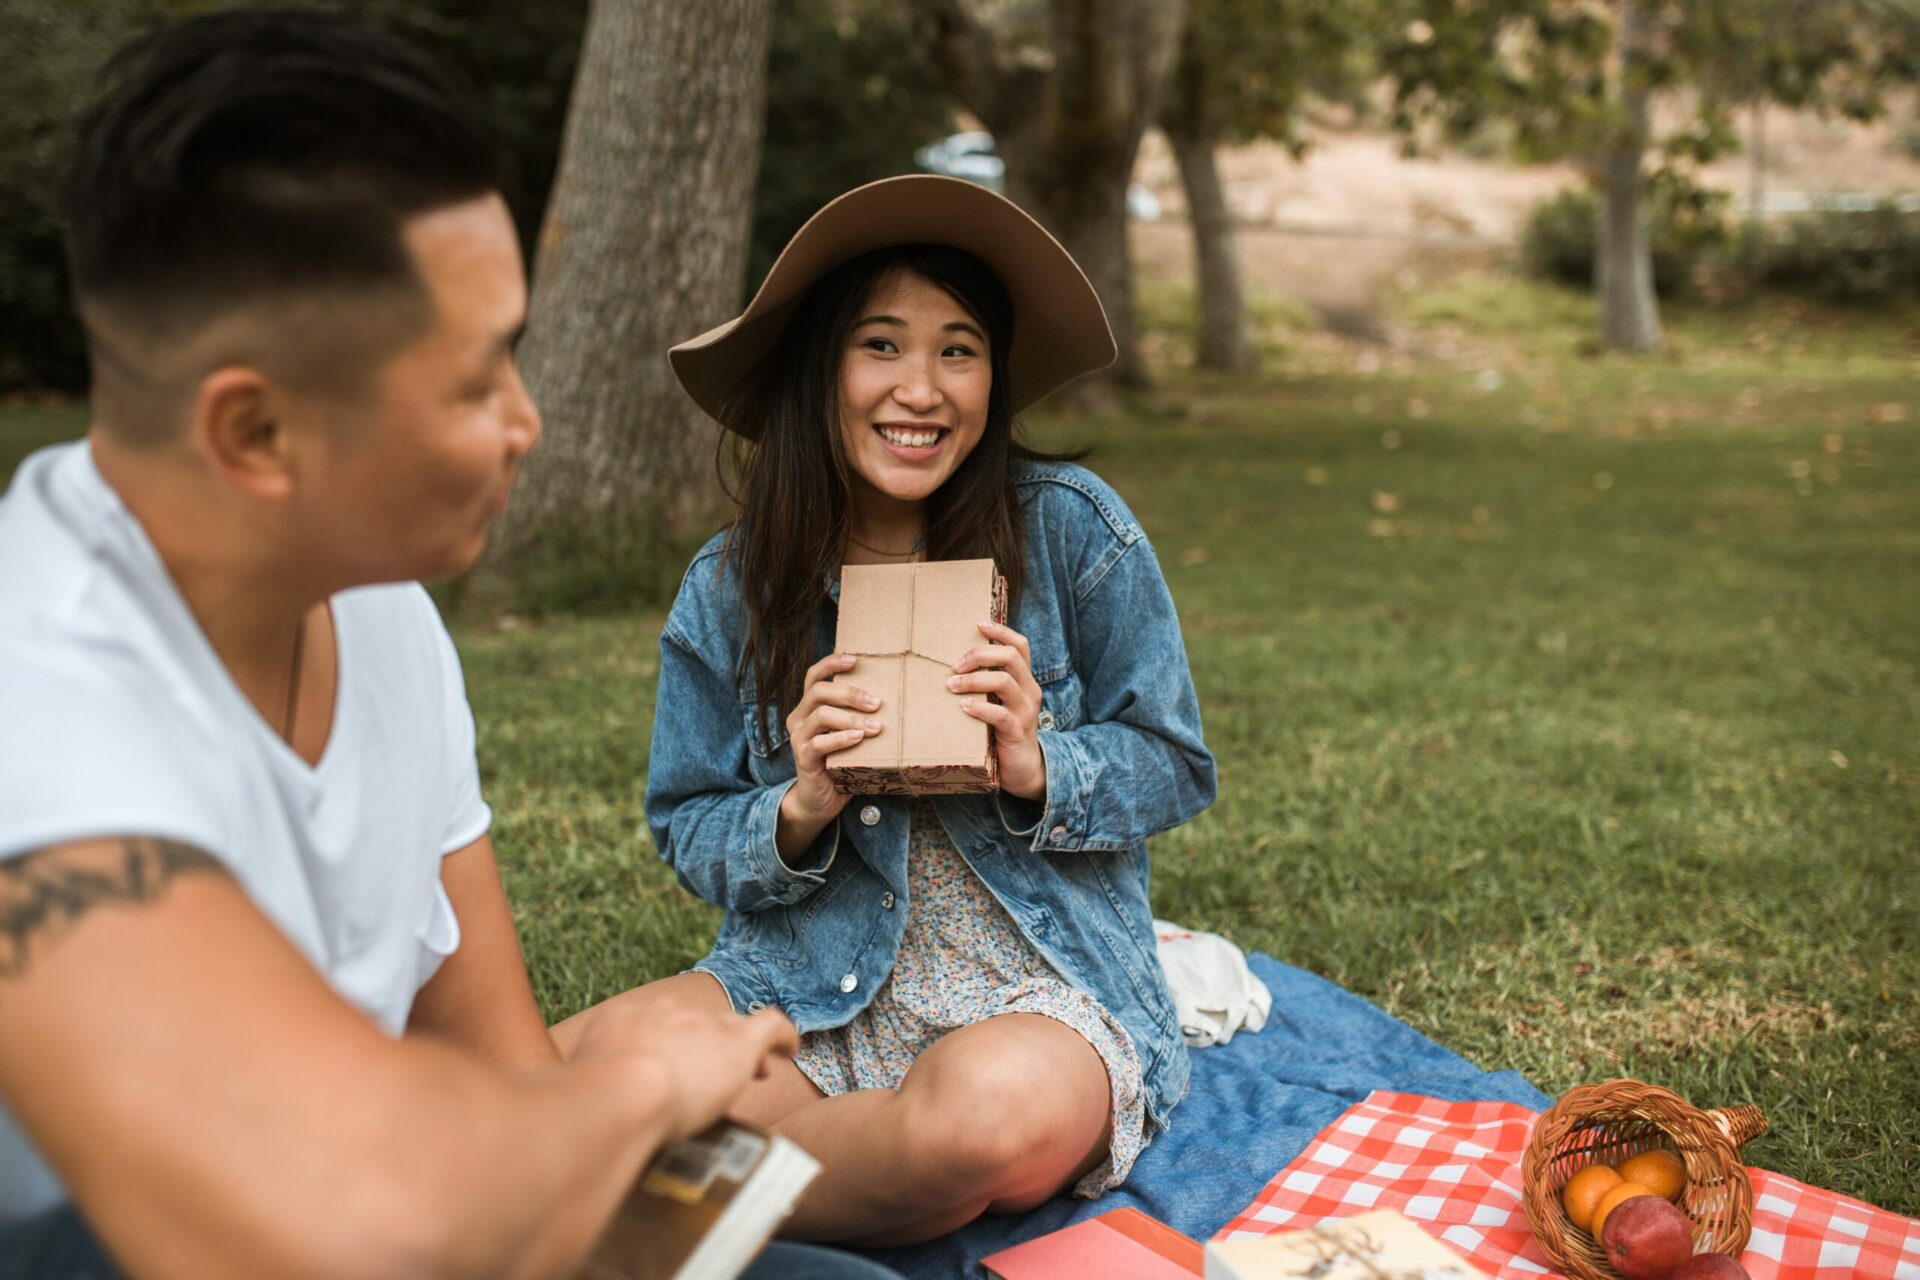 What To Wear On A Picnic Date